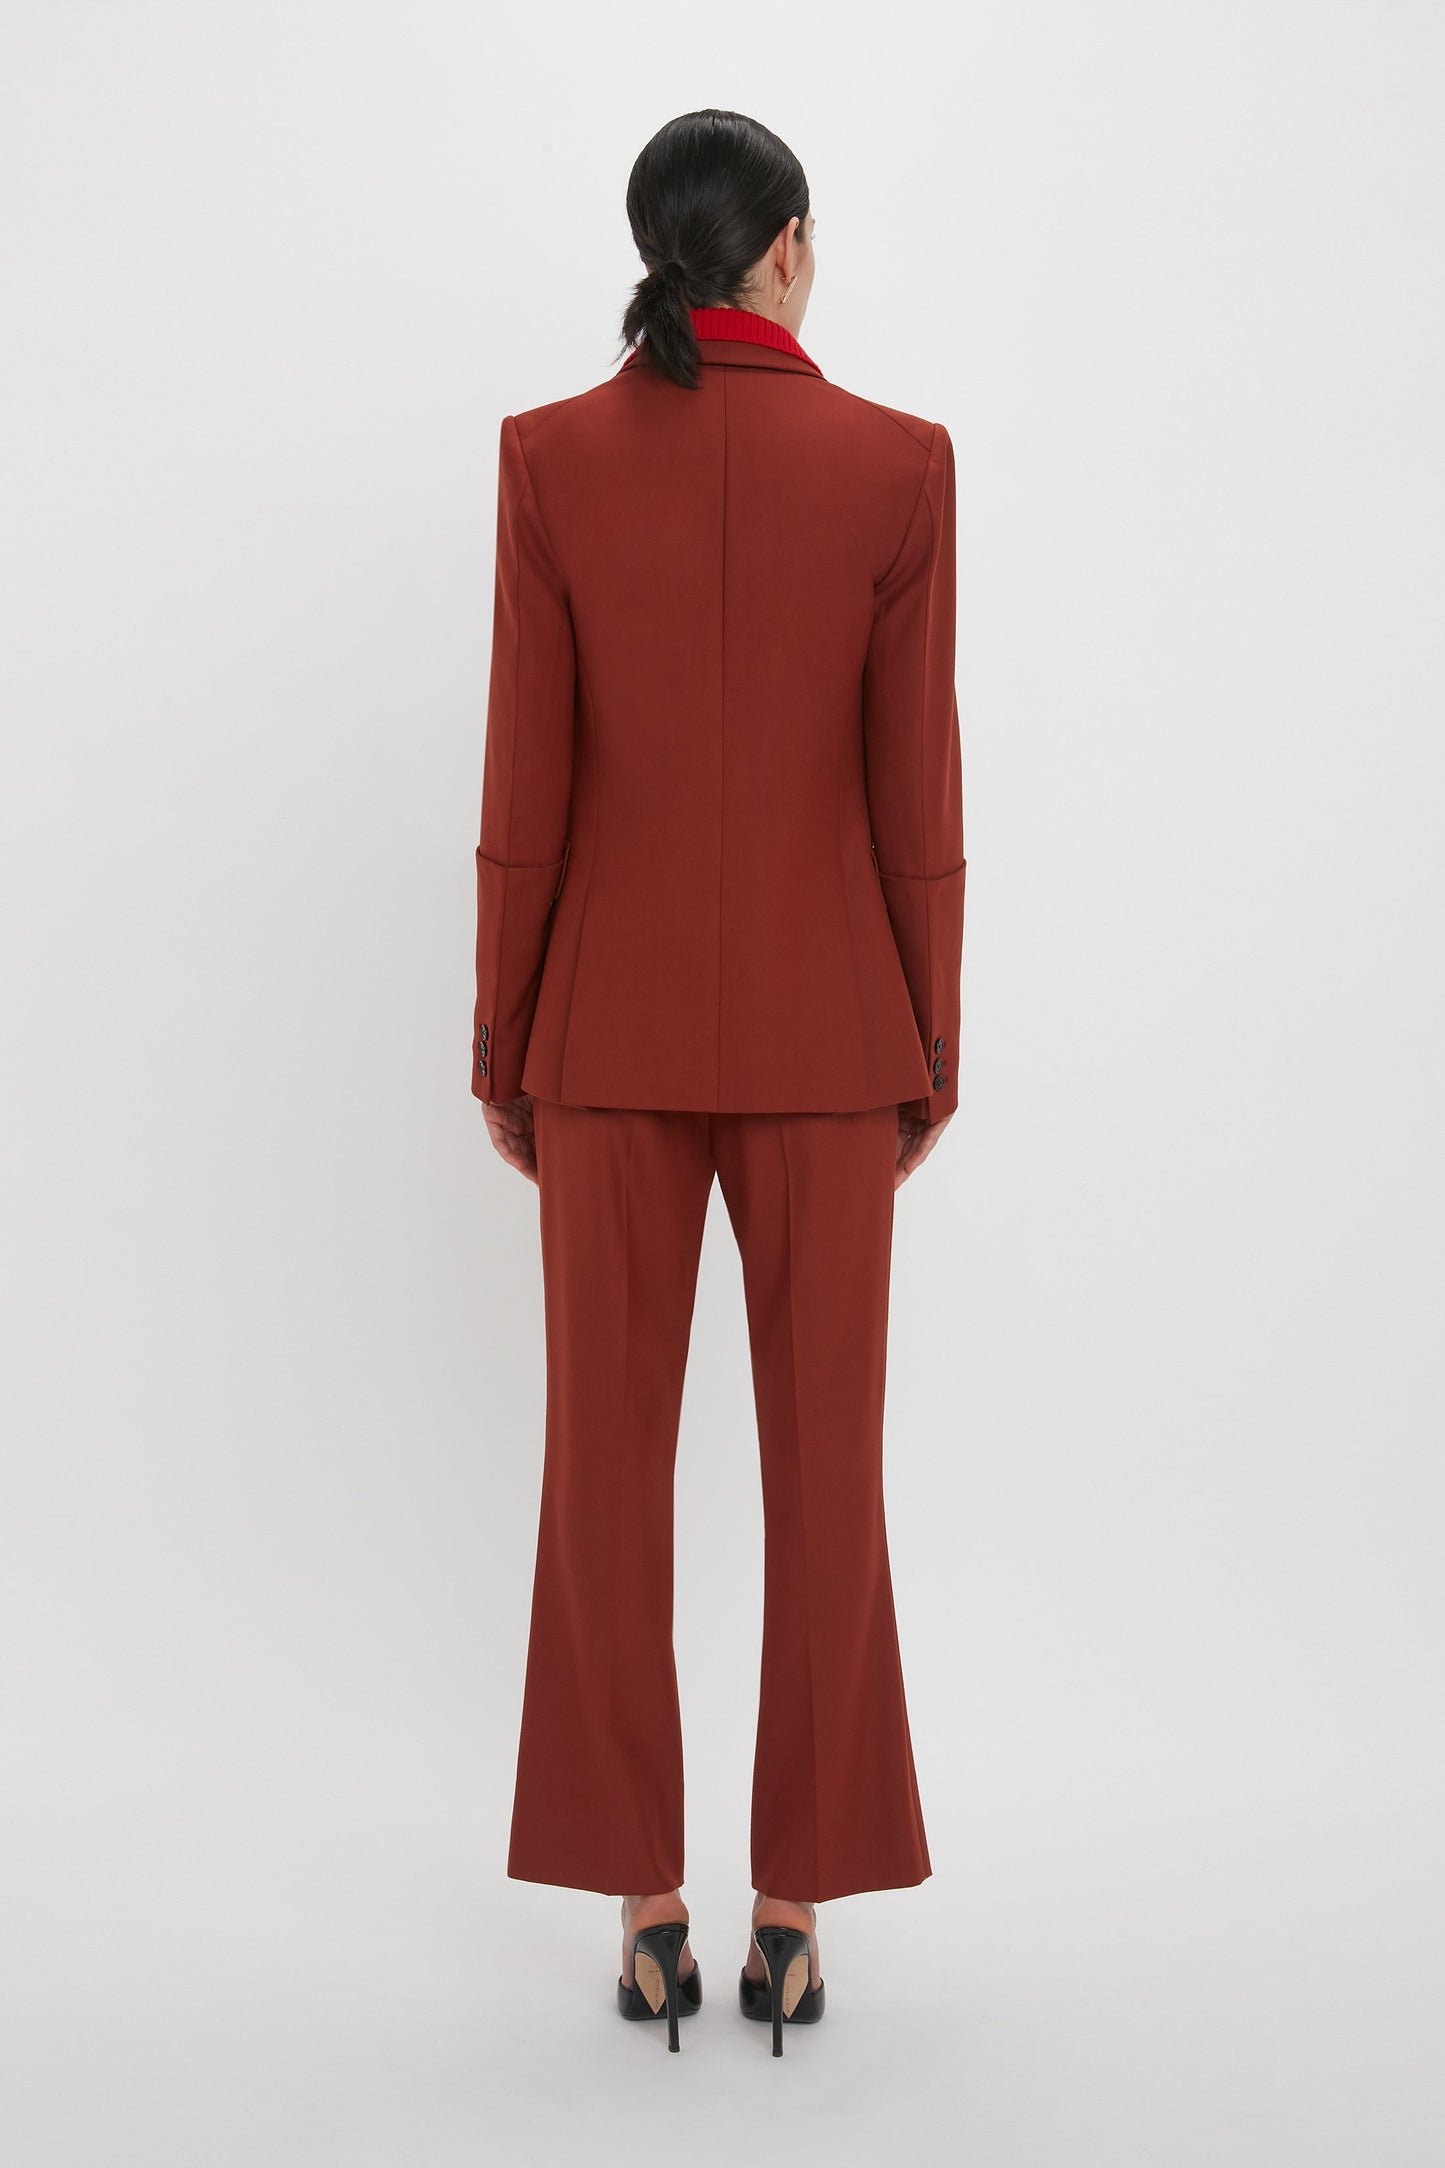 A person with black hair is shown from the back, wearing a red tailored suit with 1970s-inspired Wide Cropped Flare Trouser In Russet and black high-heeled shoes, standing against a plain white background—a nod to Victoria Beckham’s highlights for AW24.